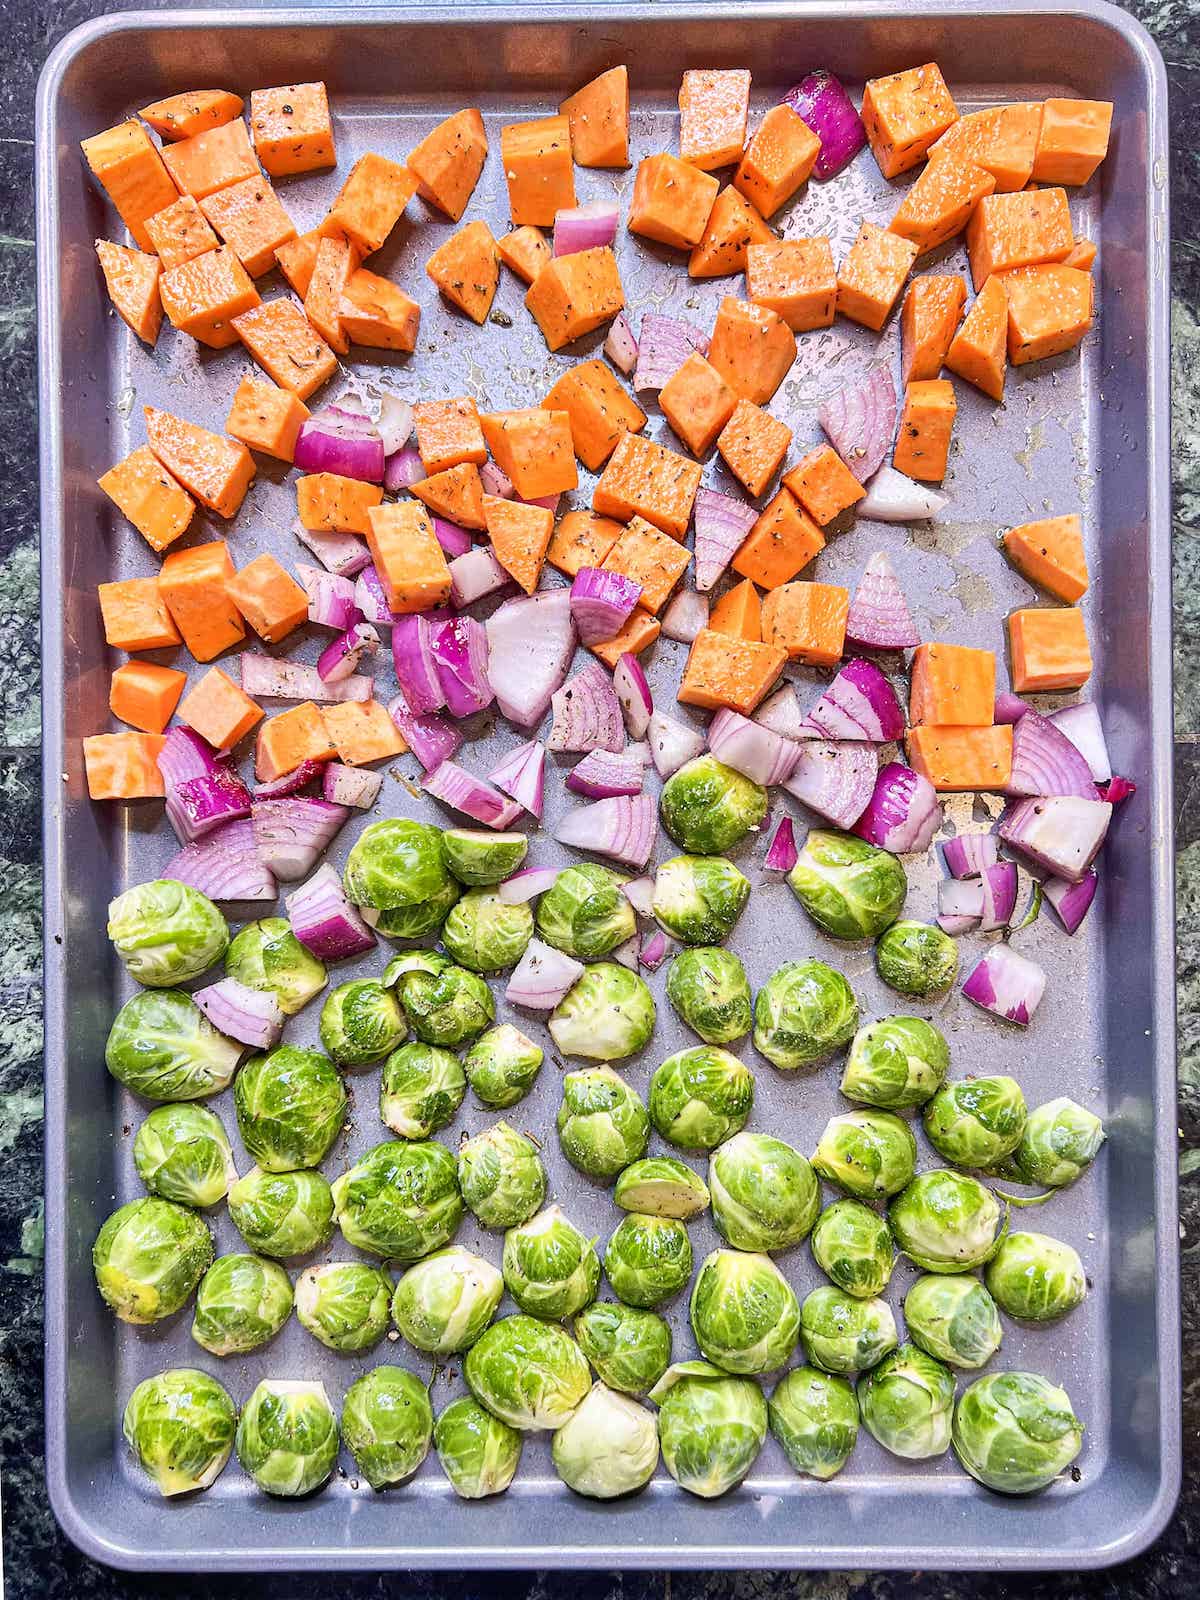 Sweet potatoes, red onion and halved brussels sprouts on a sheet pan.